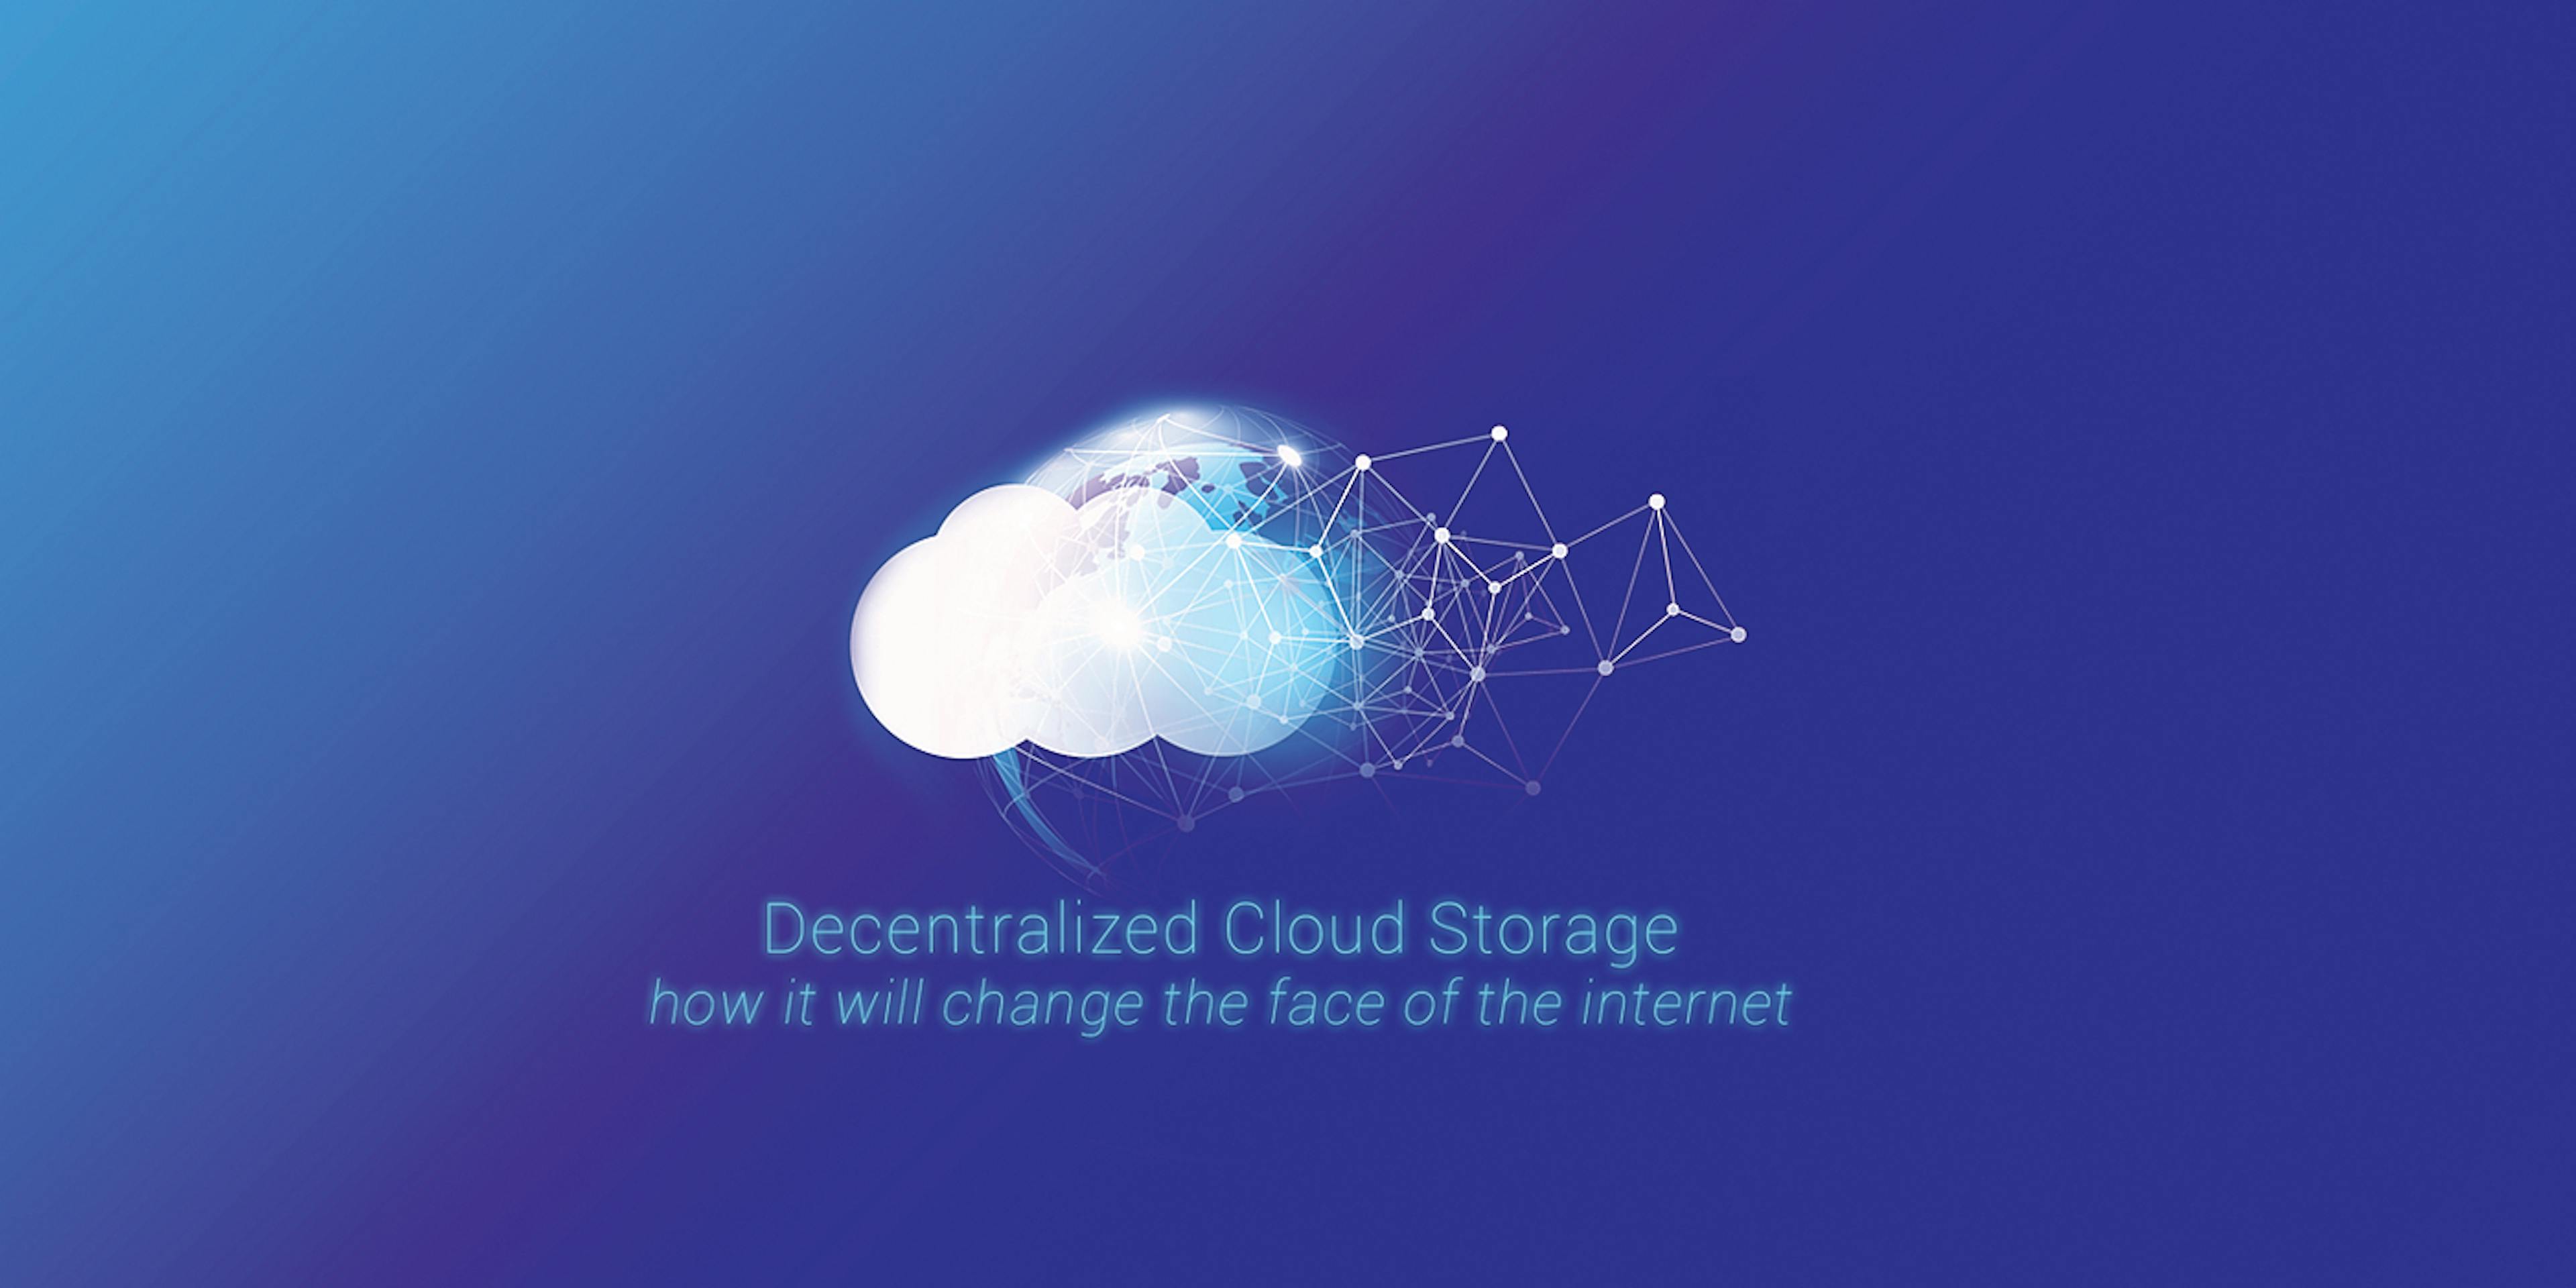 /decentralized-cloud-storage-how-it-will-change-the-face-of-the-internet-12-pc1fw3476 feature image